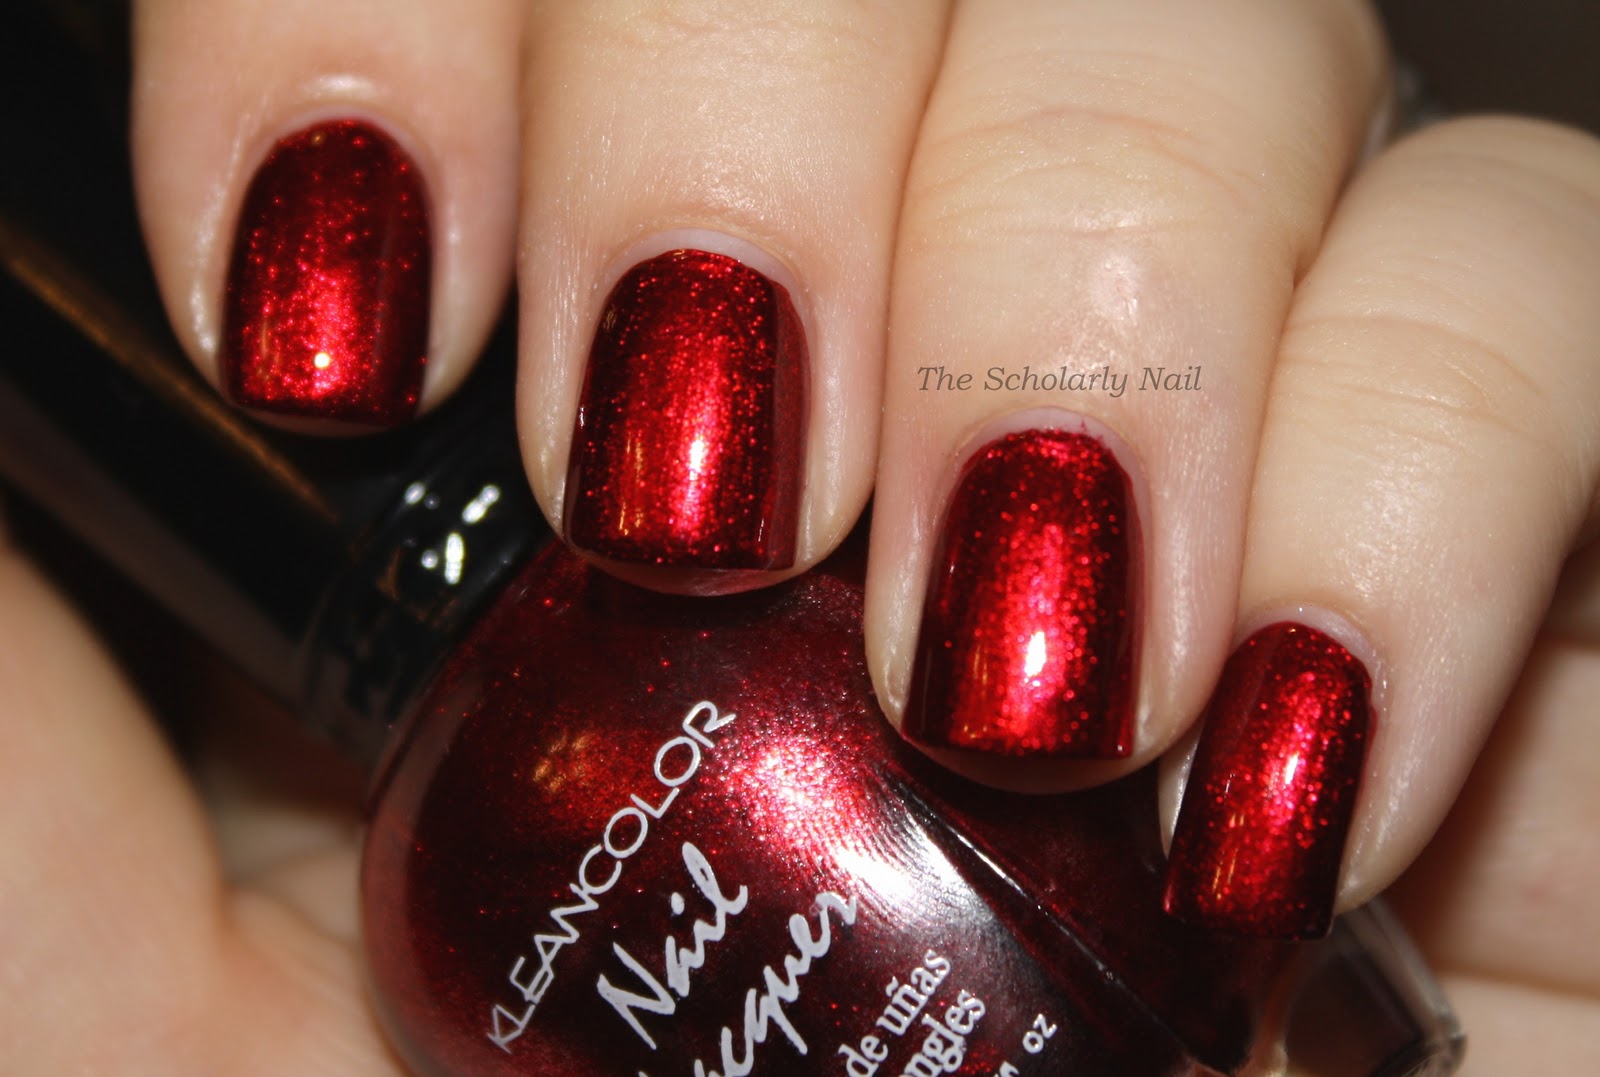 3. Elegant Valentine's Day Nail Design with Metallic Gold and Red Accents - wide 4